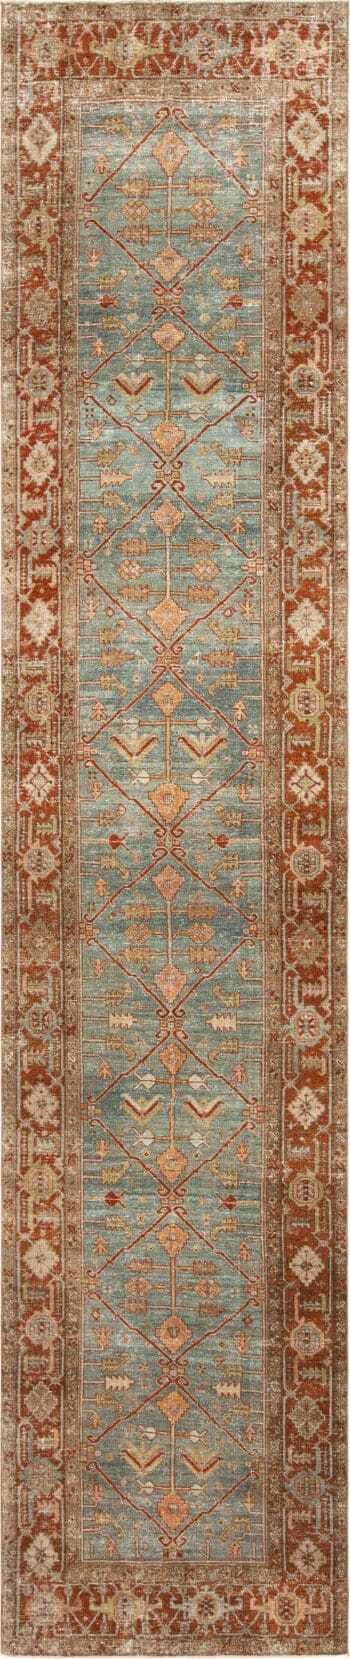 Antique Malayer Persian Blue Background Runner Rug 72836 by Nazmiyal Antique Rugs